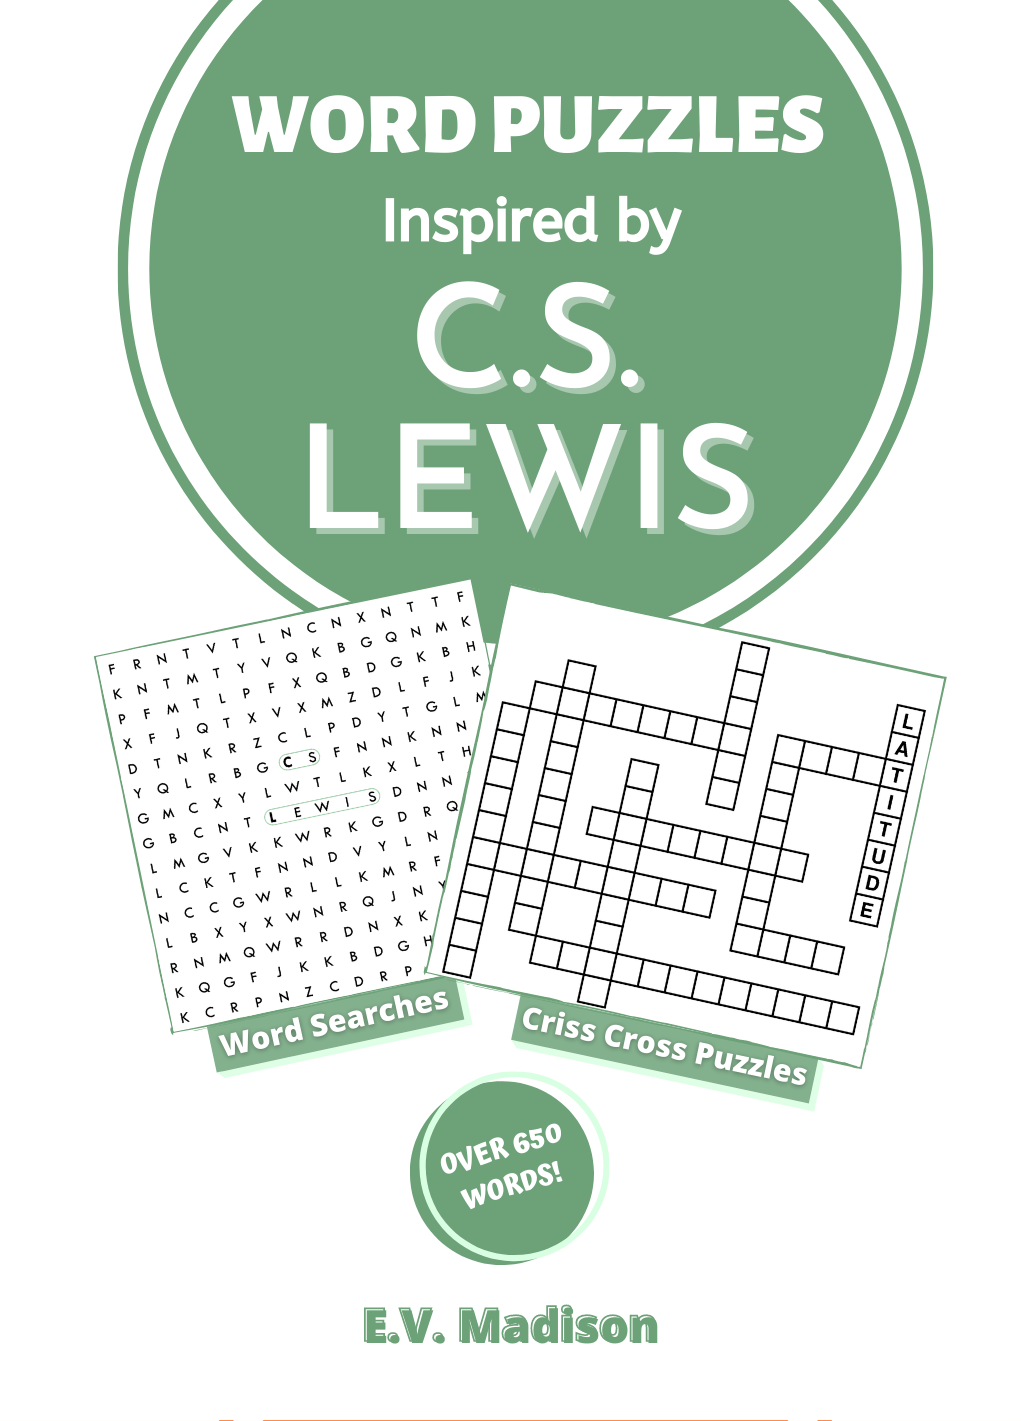 Word Puzzles Inspired by C. S. Lewis